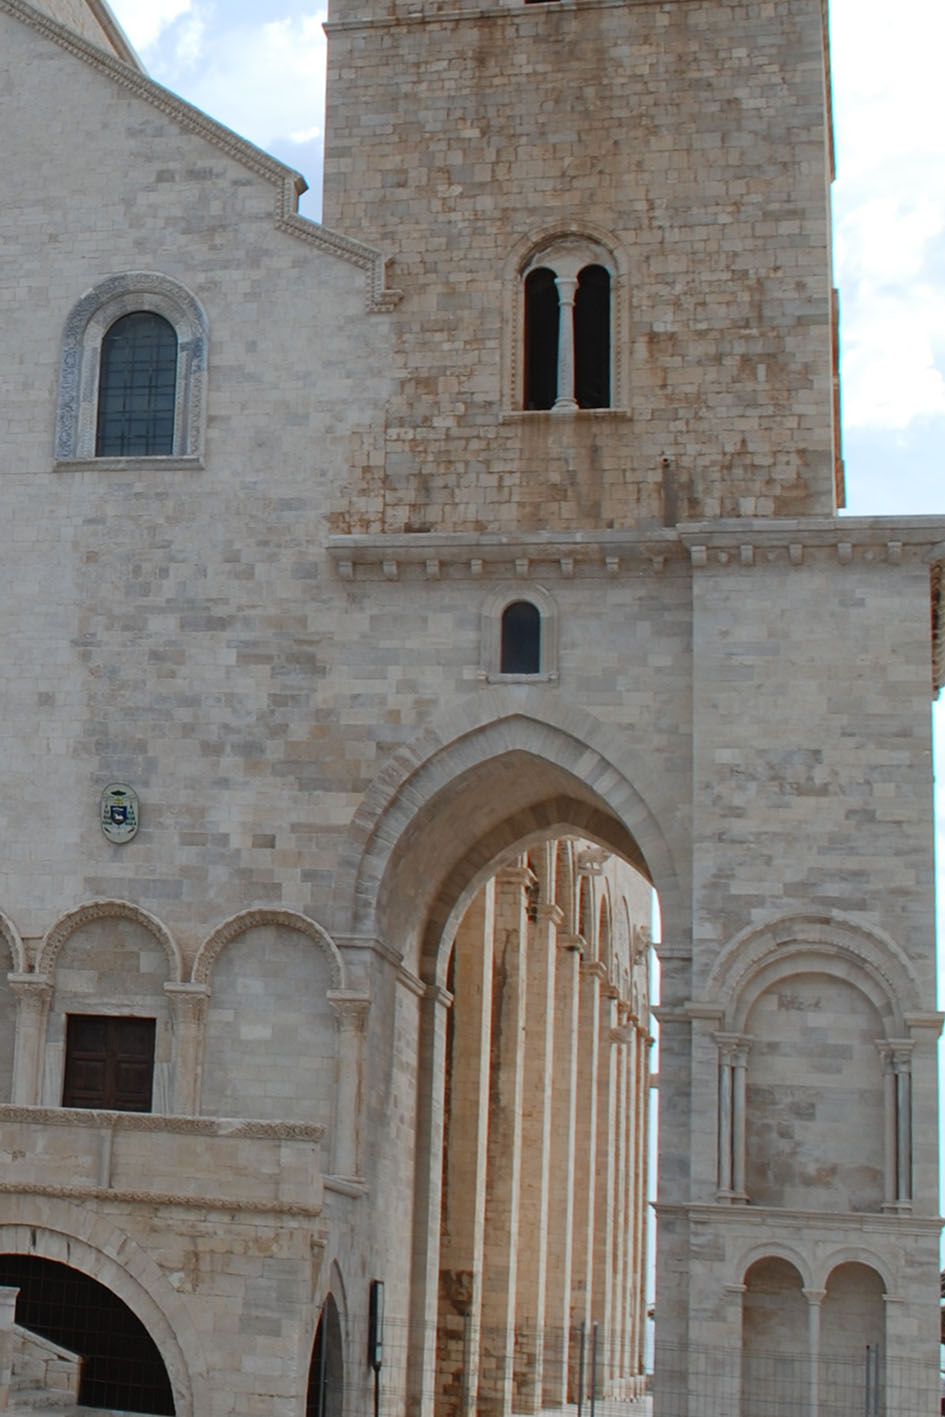 HIGH POINTED ARCH TO EAST: SAILING TO BYZANTIUM?